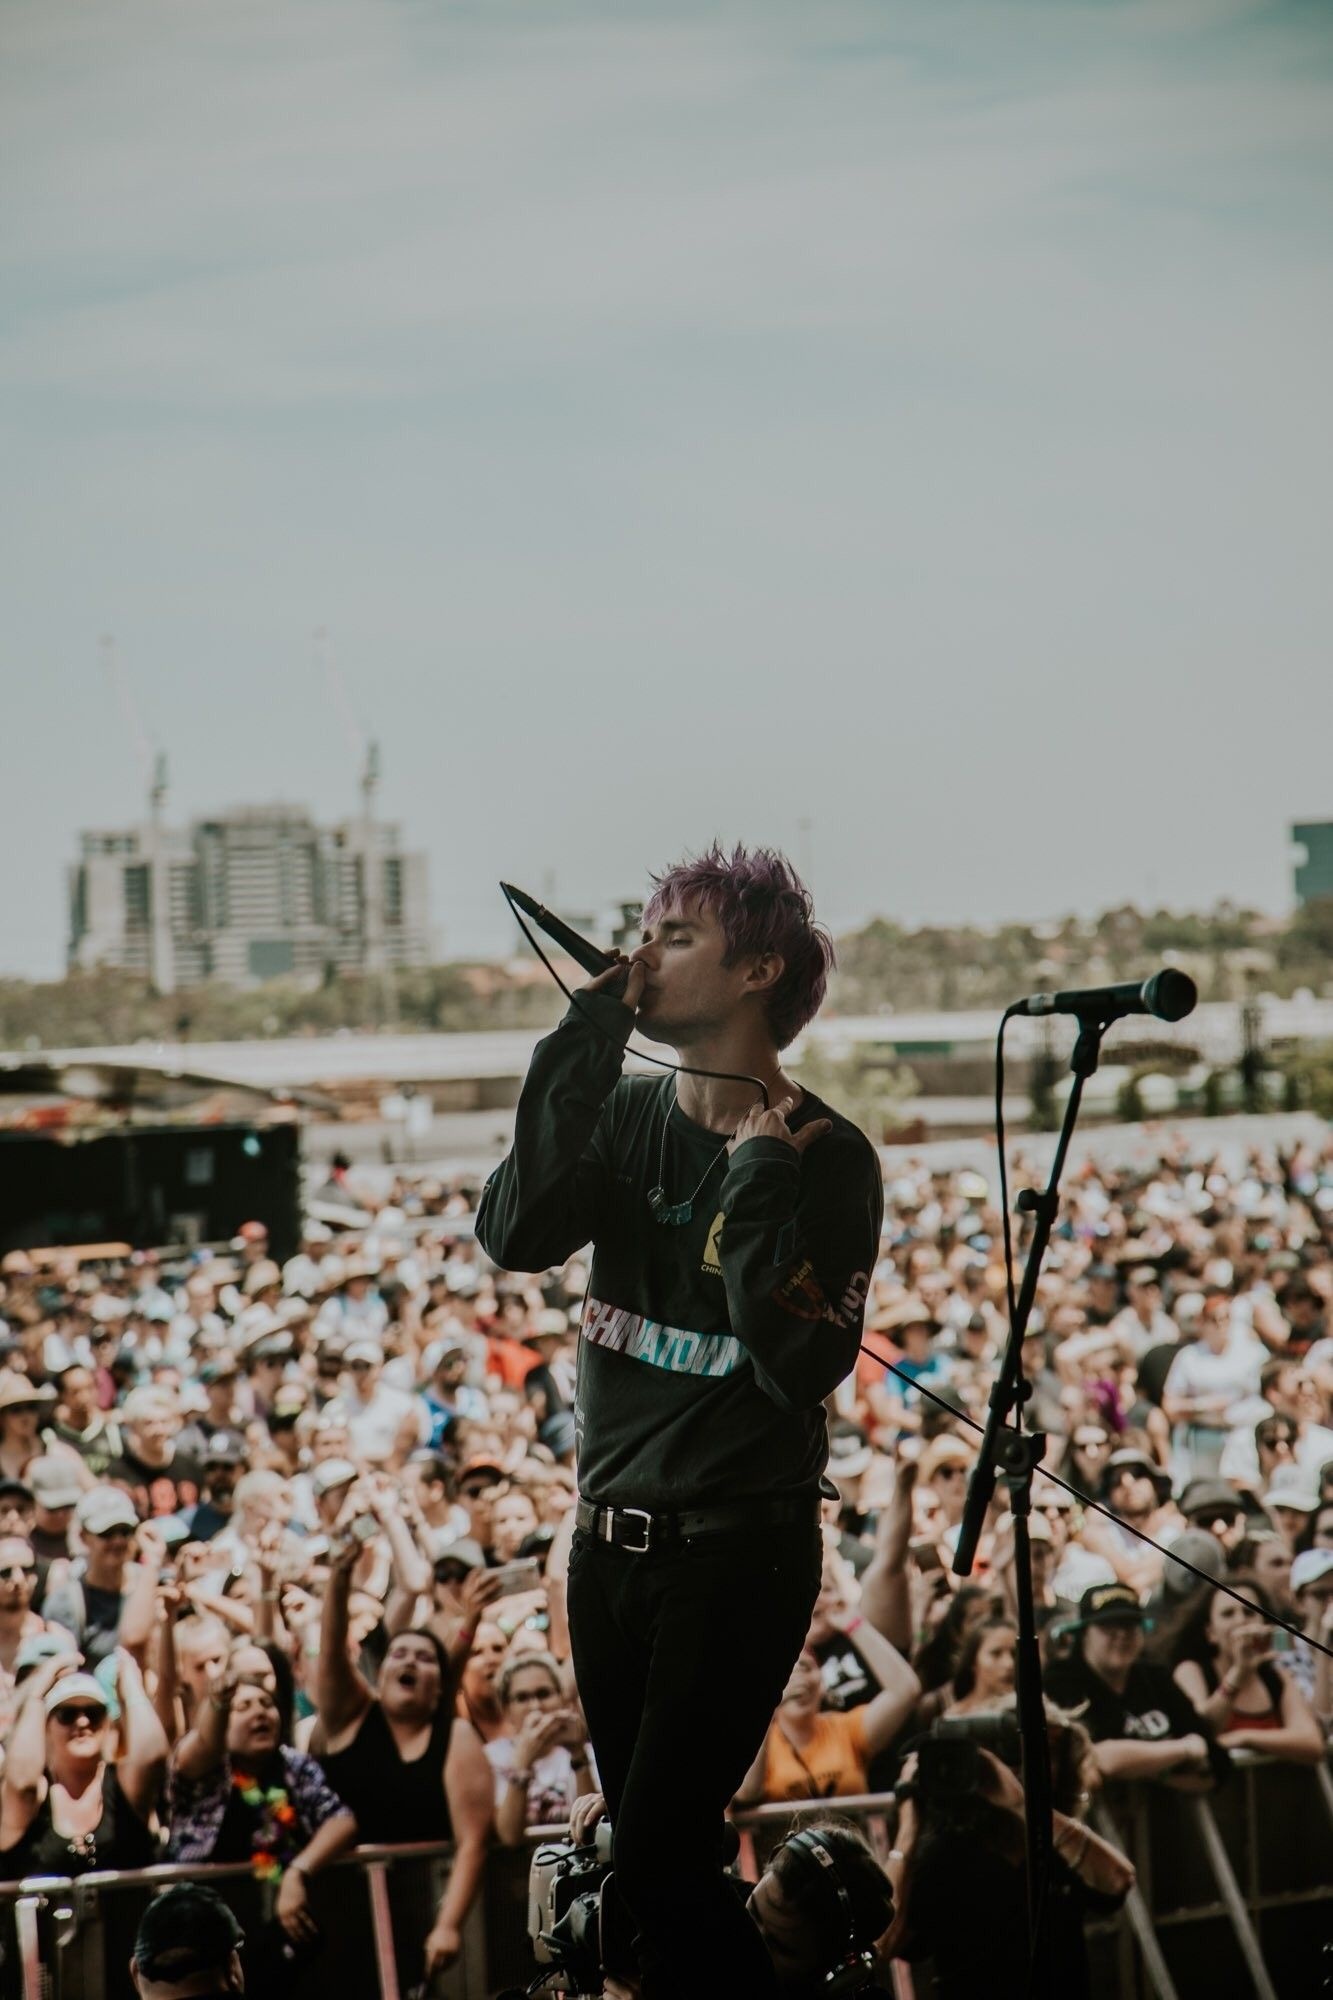 Pin by Savannah Poar on waterparks | Water park, Awsten knight, Waterparks band 1340x2000